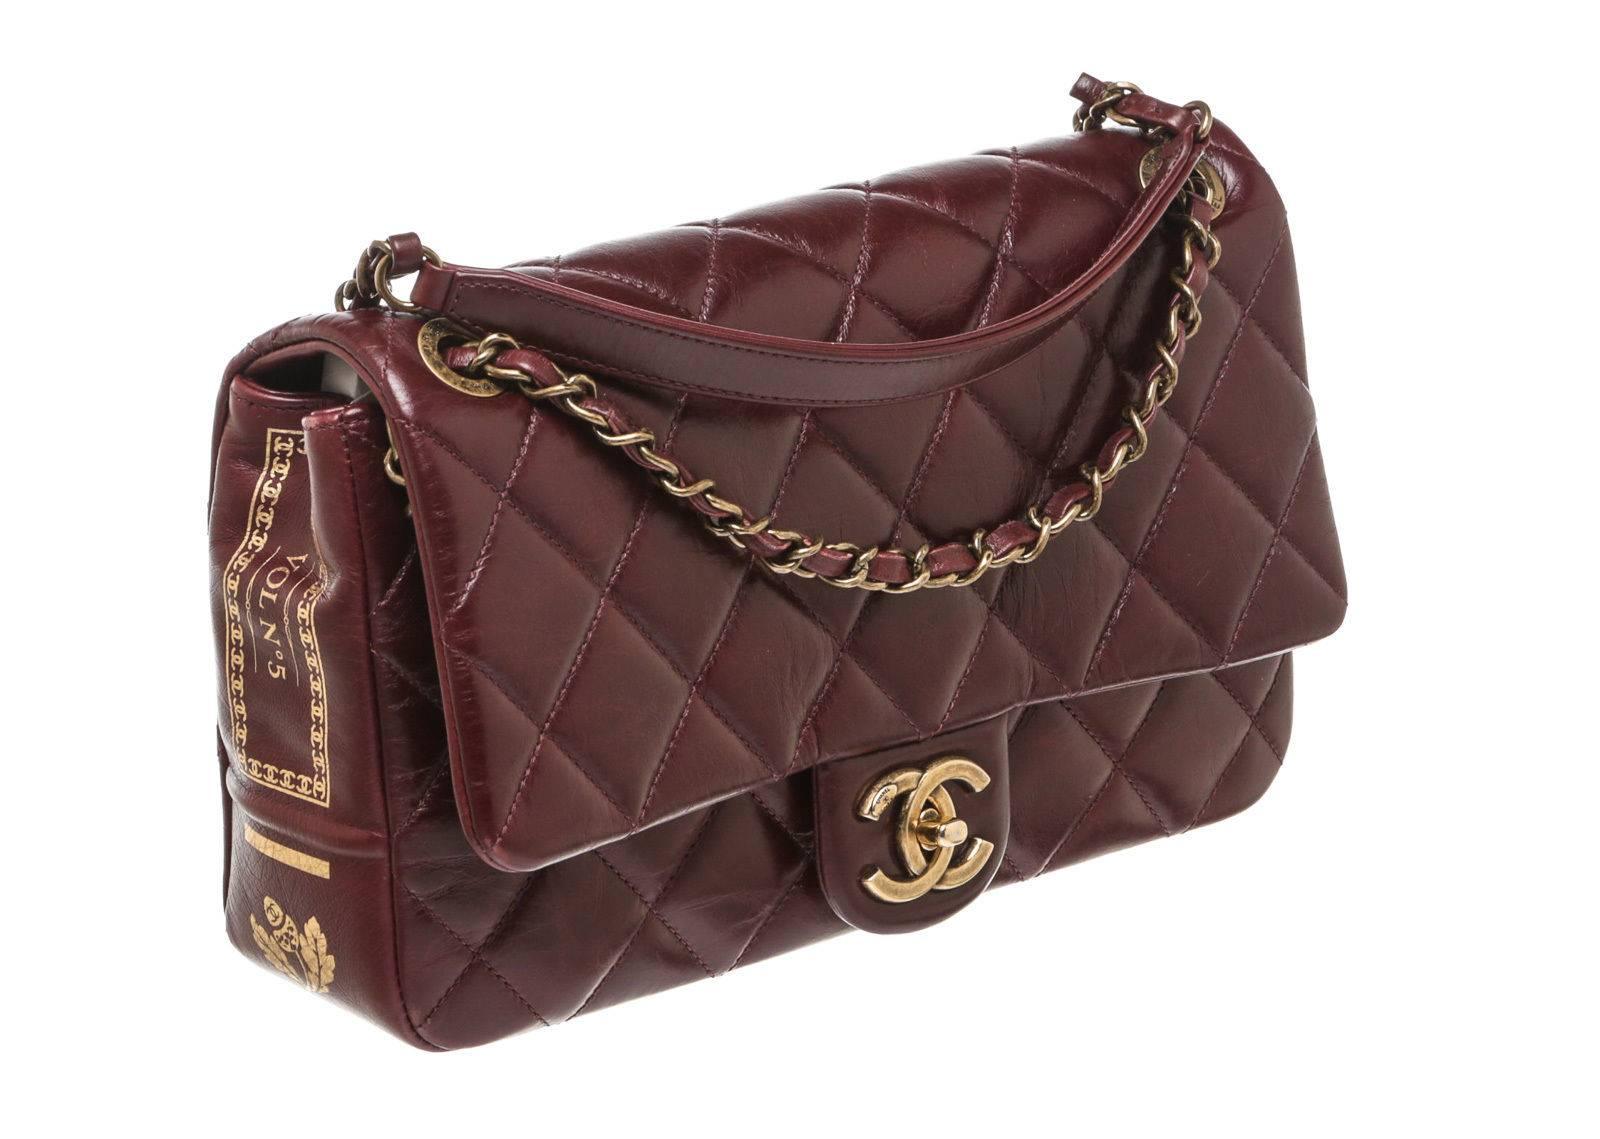 Designer: Chanel
Type: 
Handbag
Condition: 
Exterior: Pre-owned in very good condition - minor wear/faint trim wear 
Interior: Pre-owned in very good condition - minor wear
Color: 
Burgundy
Material: 
Calfskin Leather
Dimensions: 
11